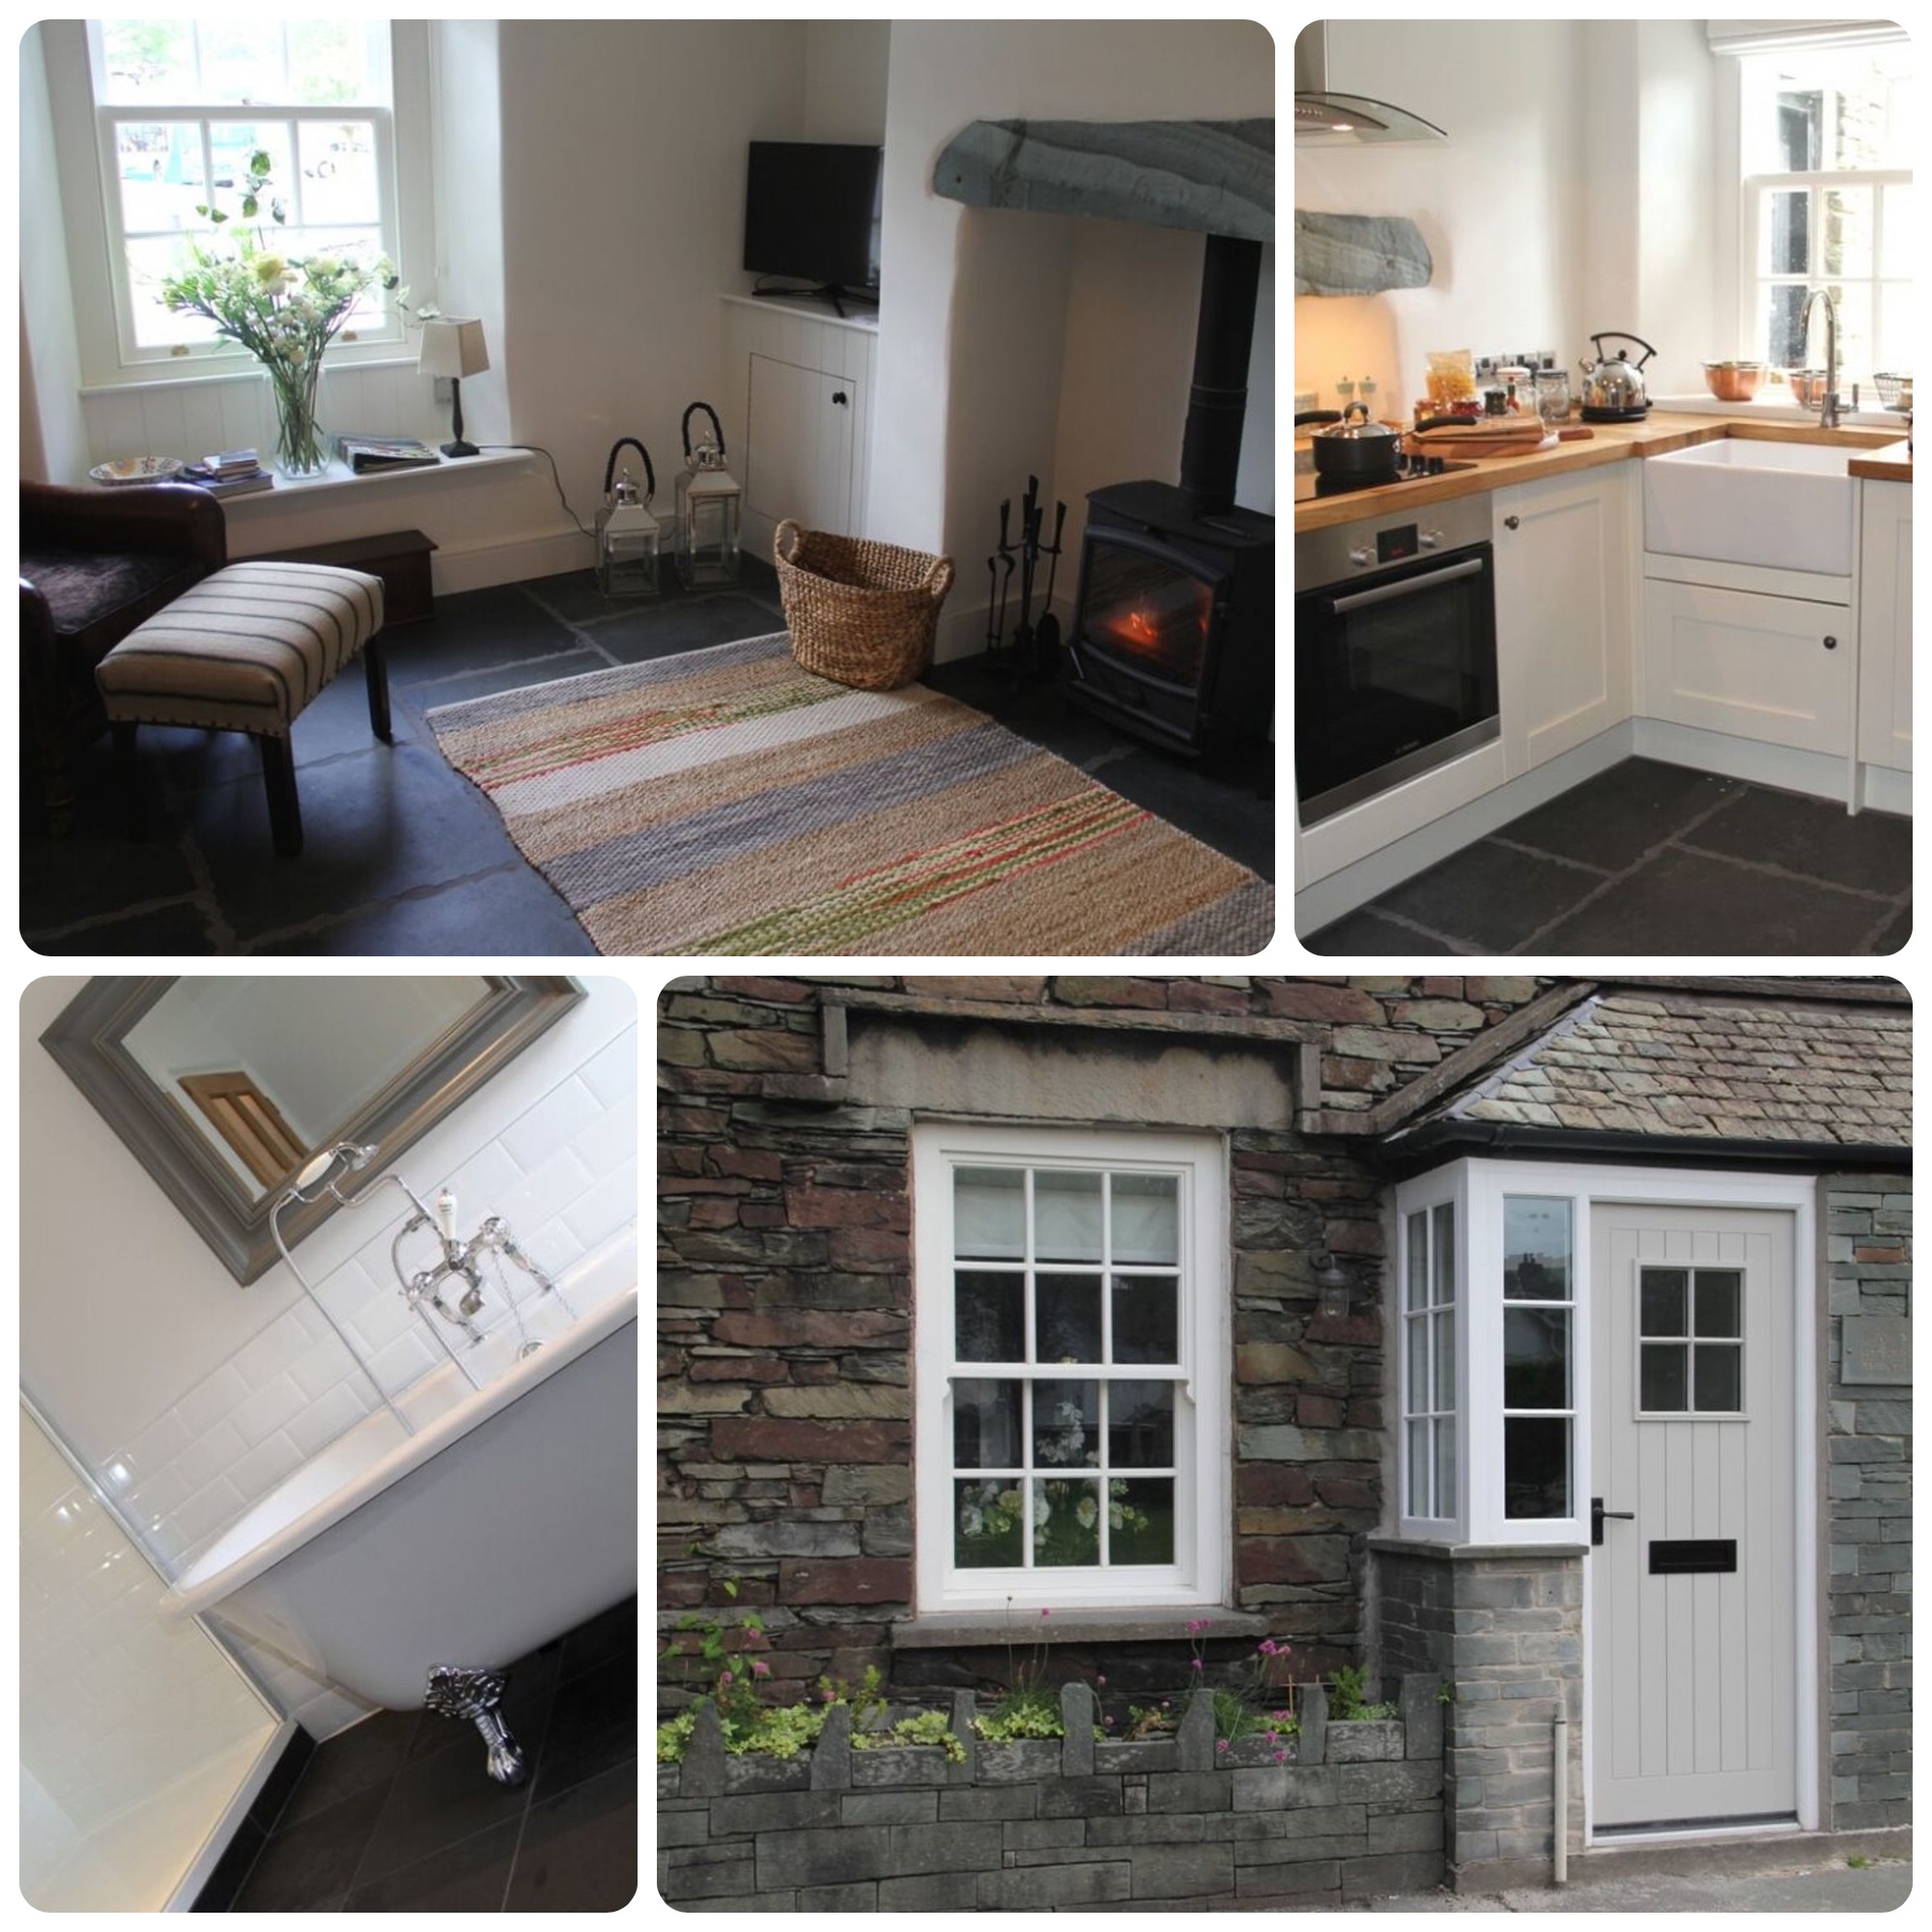 Traditional Lakeland Cottage right in the heart of the beautiful village of Grasmere. Previous guests have loved the style and quality of the interior furnishings too